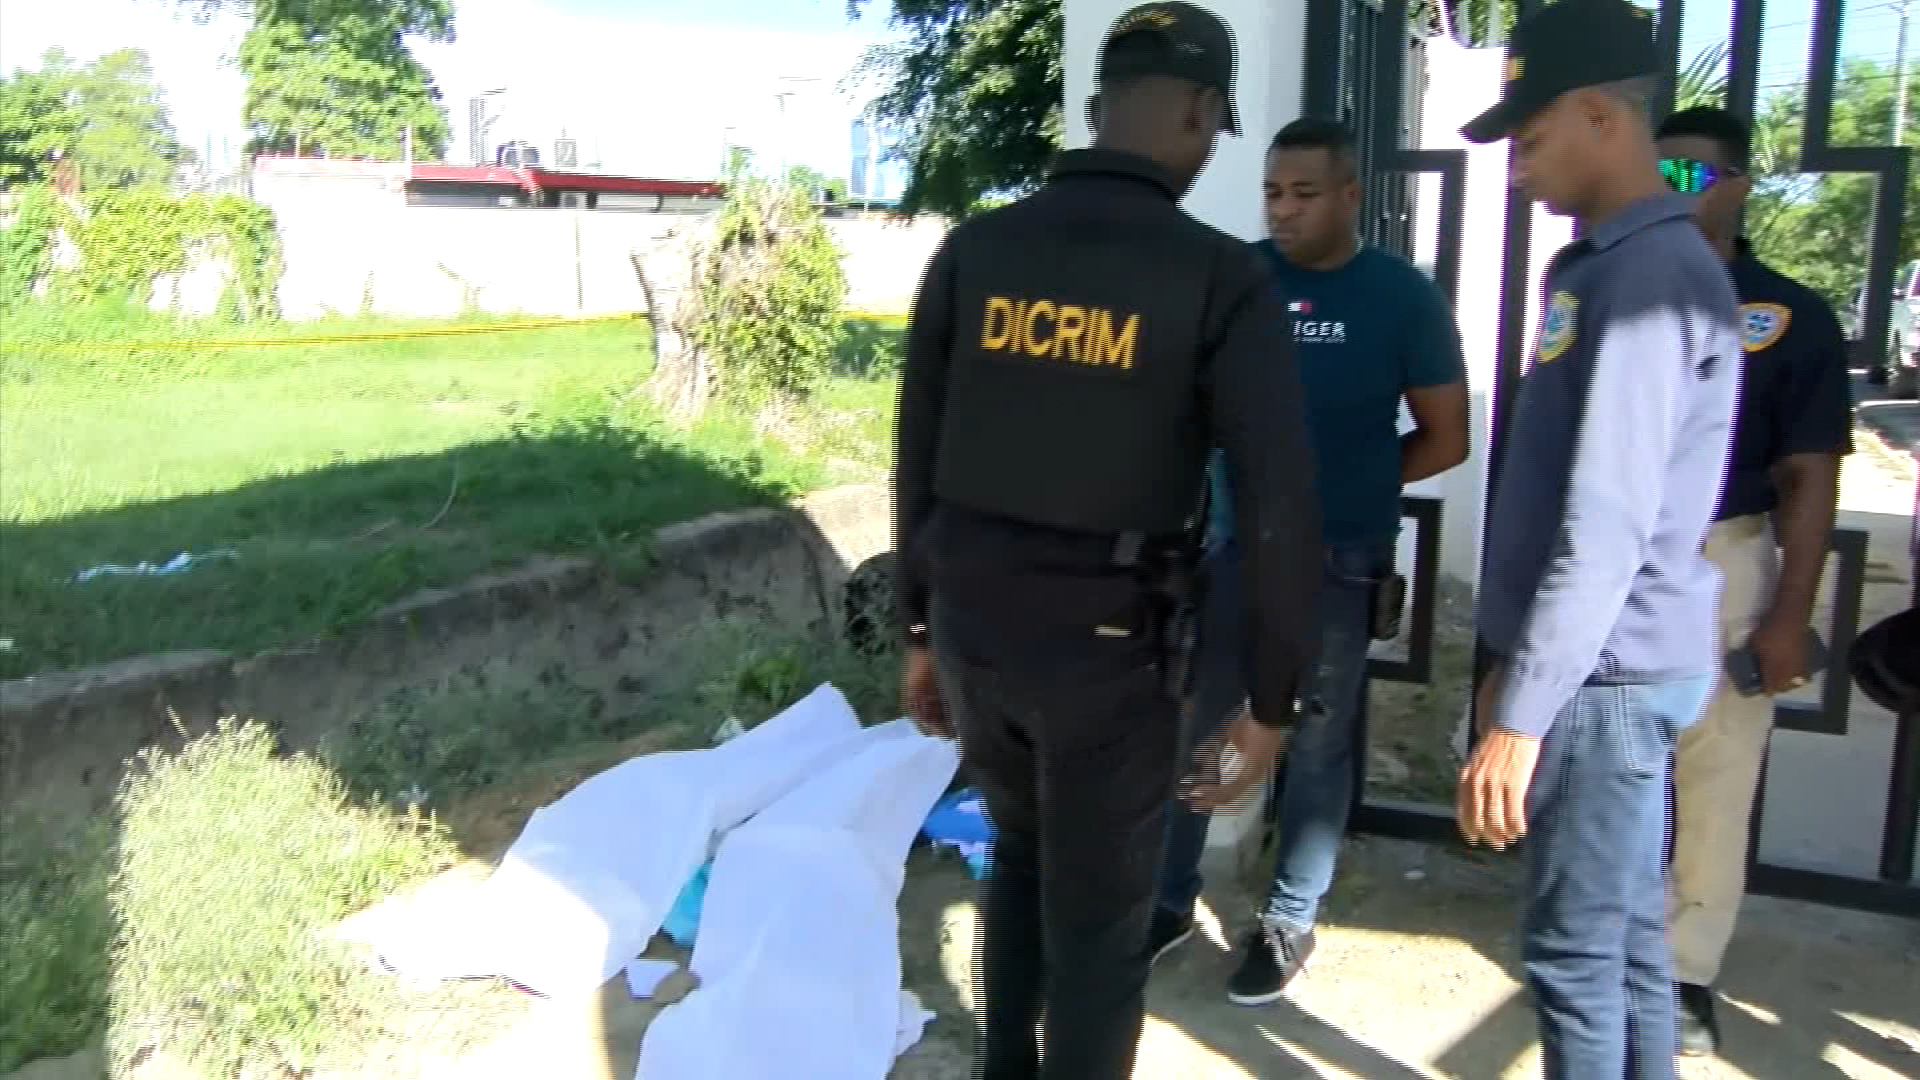 Bodies of six newborns found at cemetery entrance in Dominican Republic